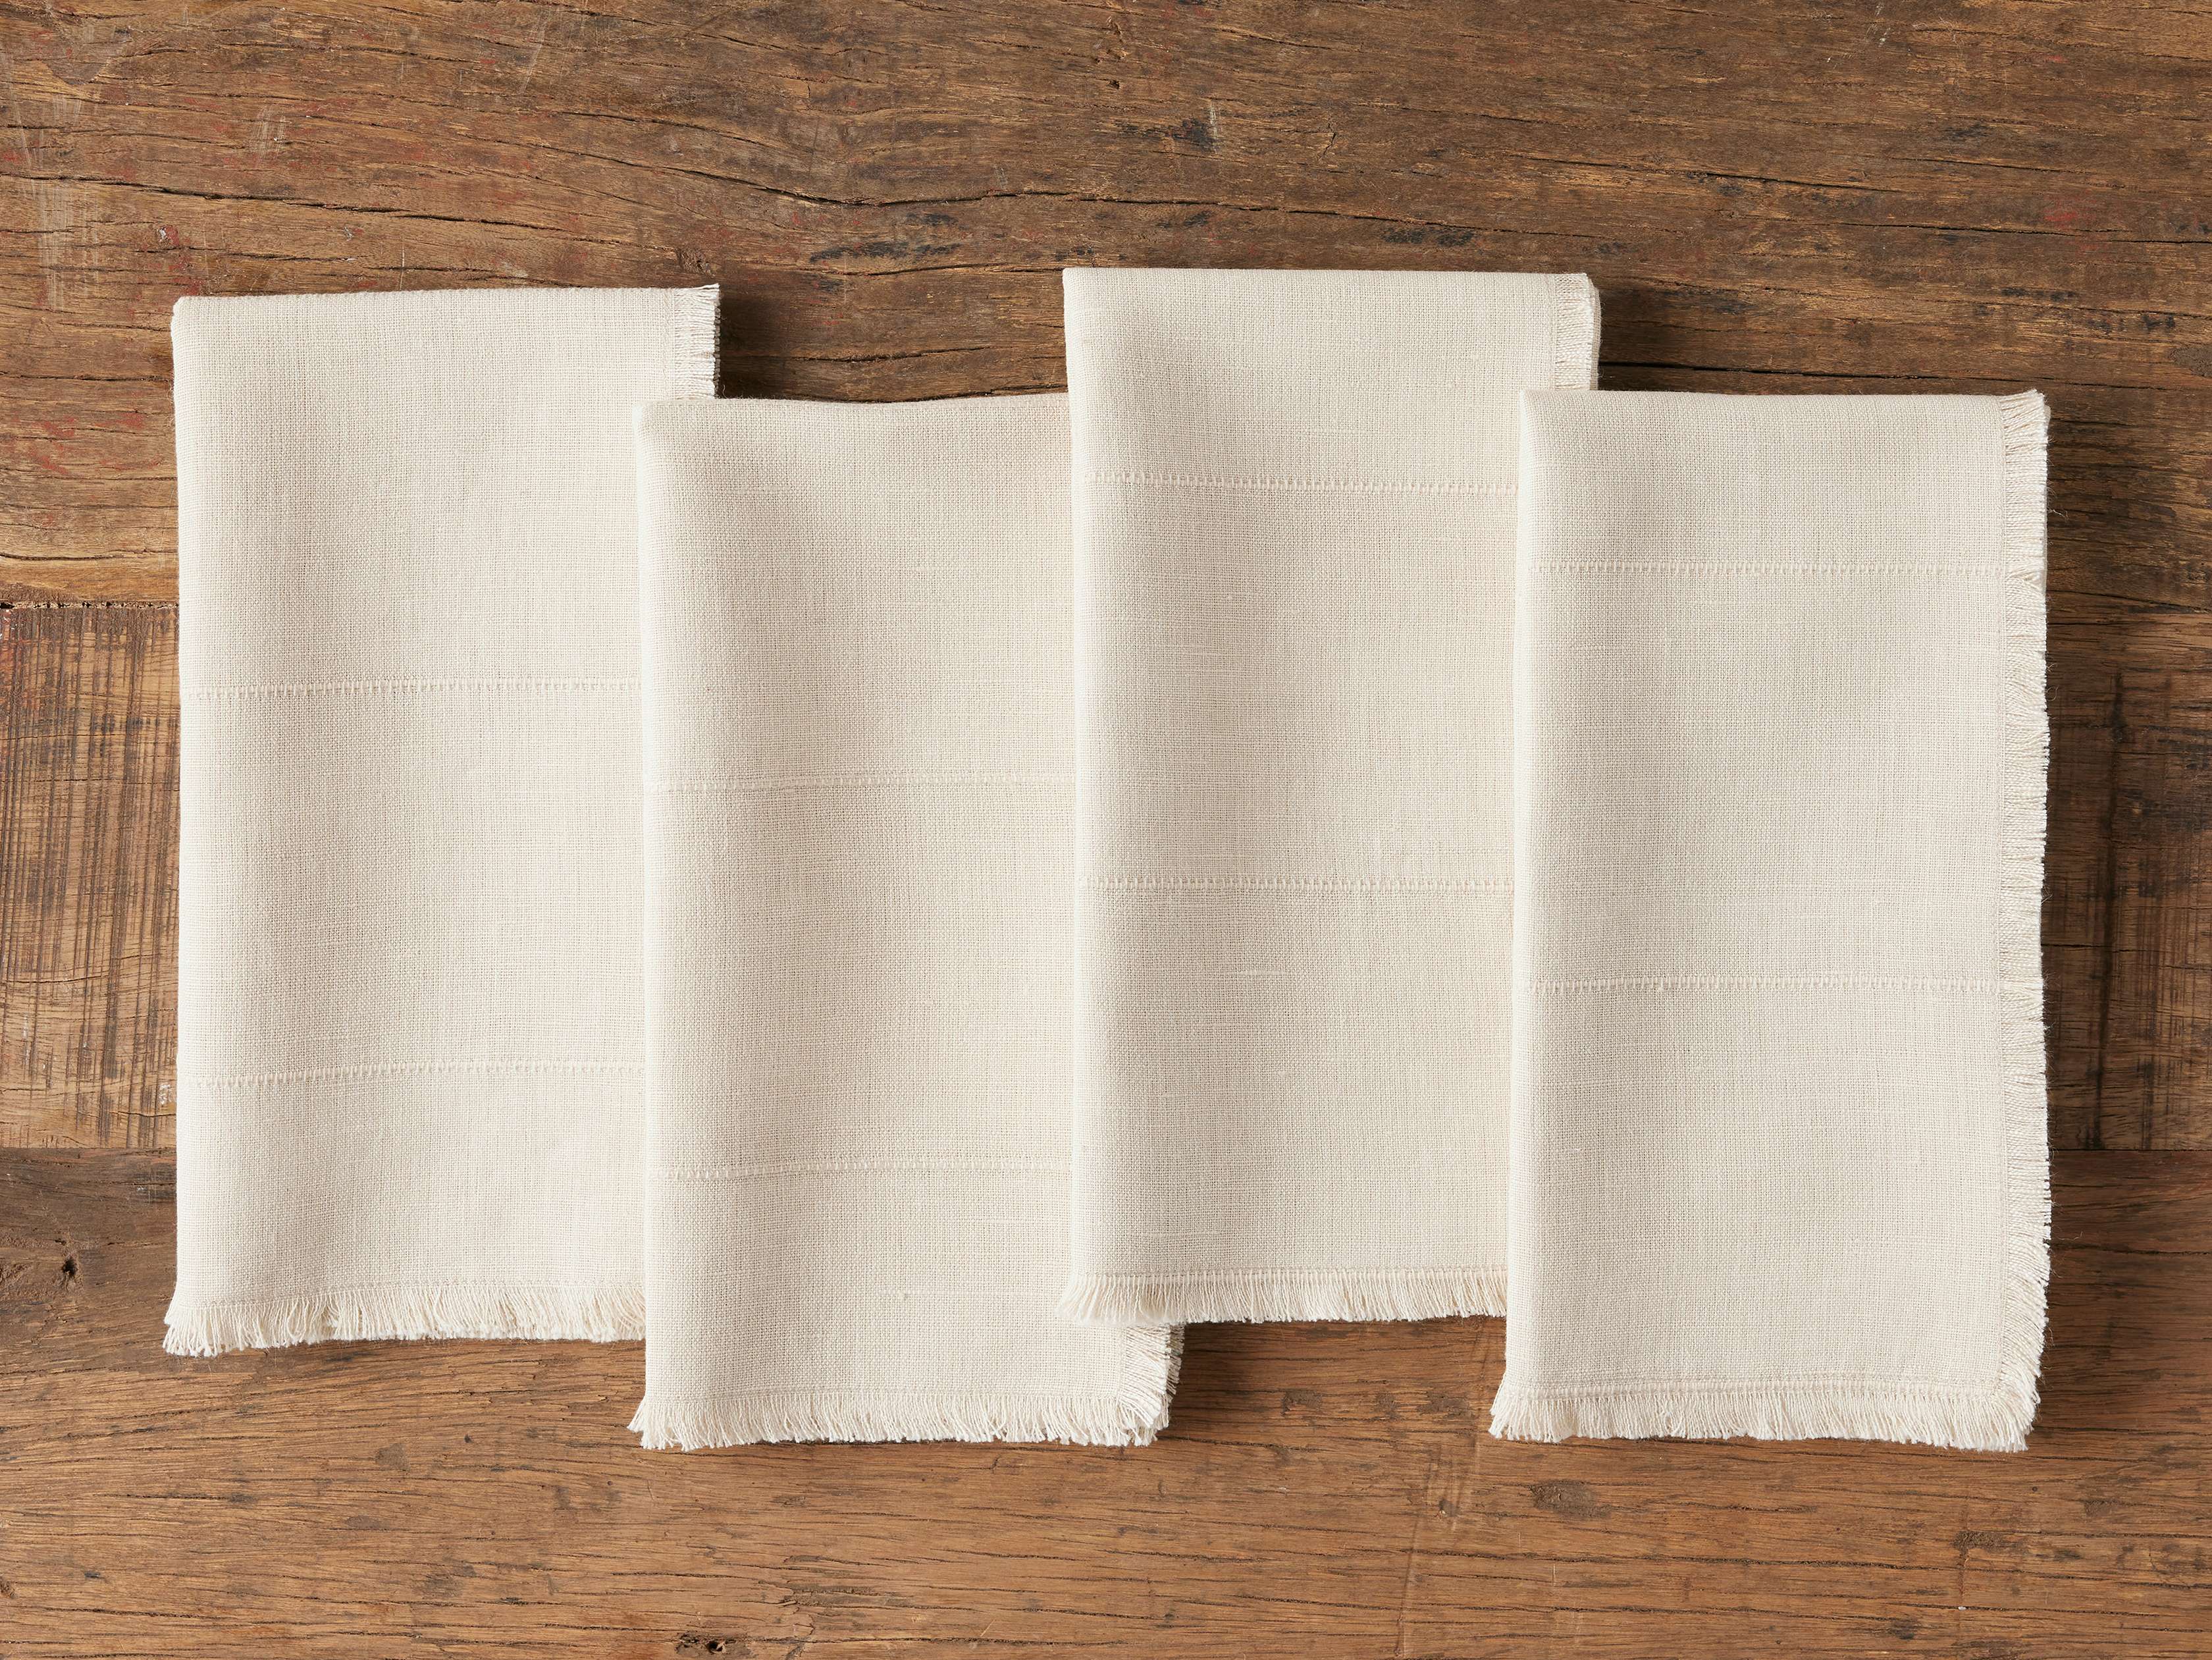 Rustic Linen Napkin/Placemat with frayed edge